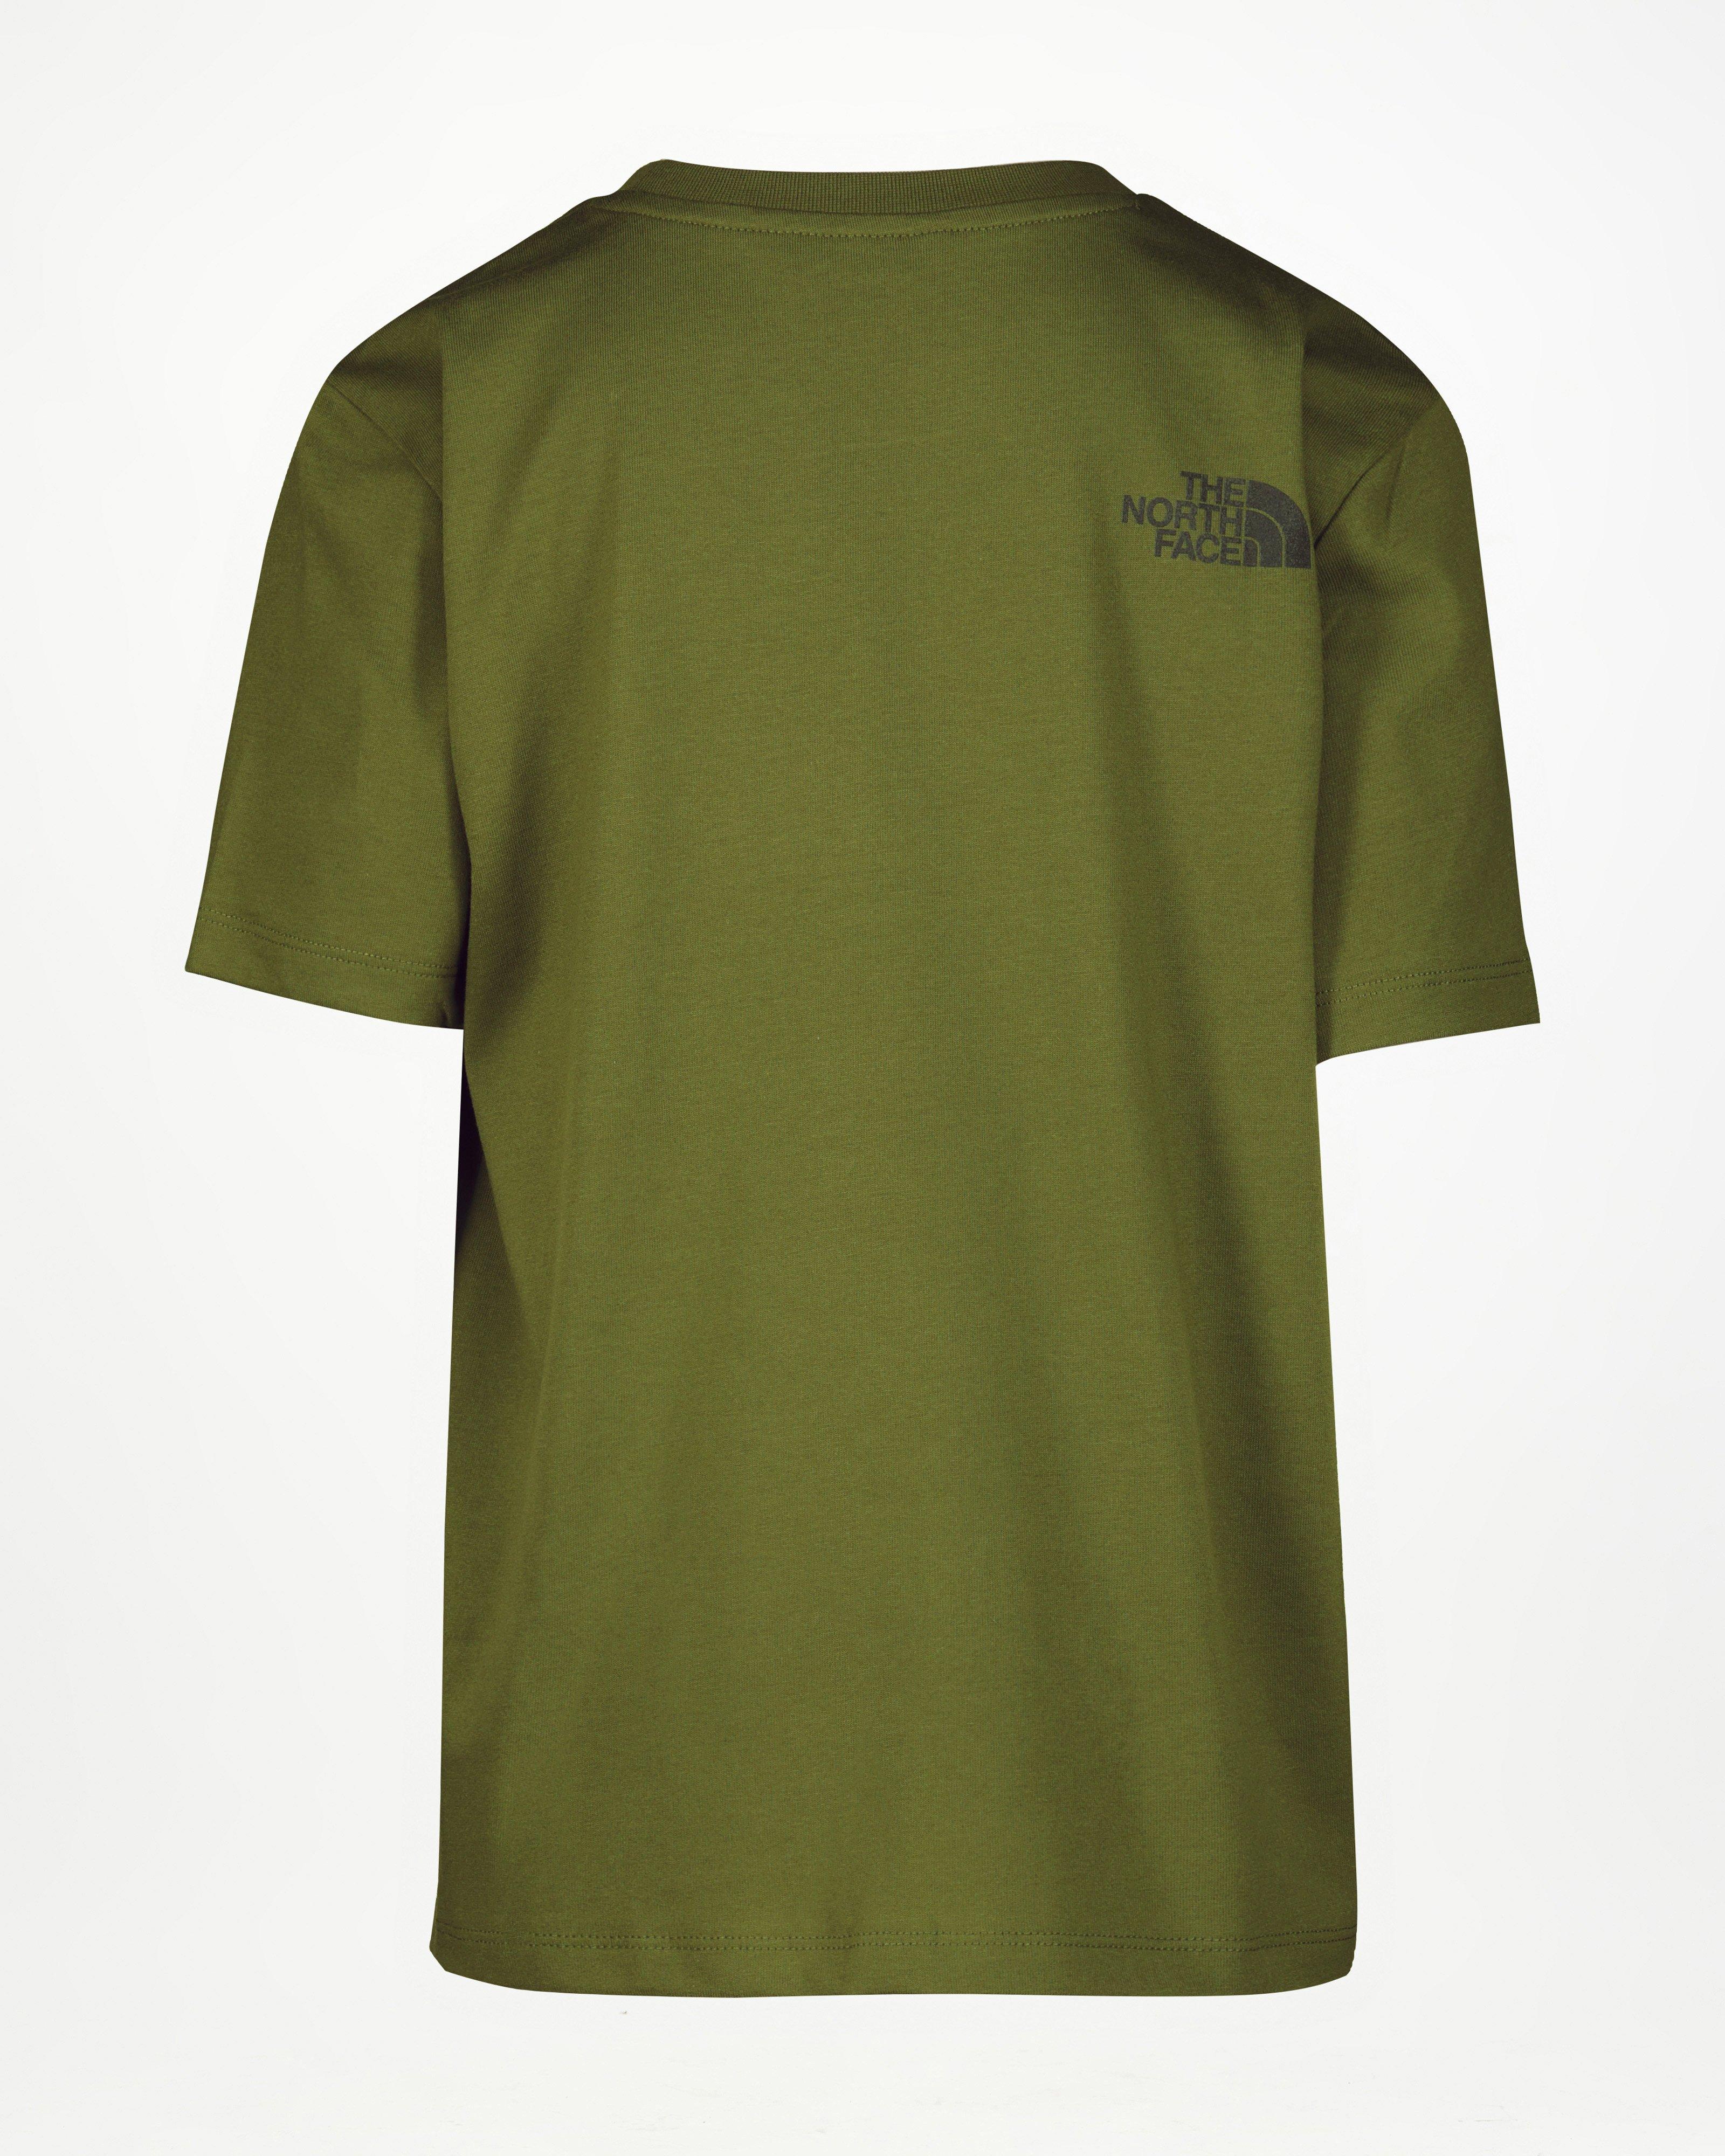 The North Face Youth Easy Short Sleeve T-shirt -  Dark Green/Dark Olive